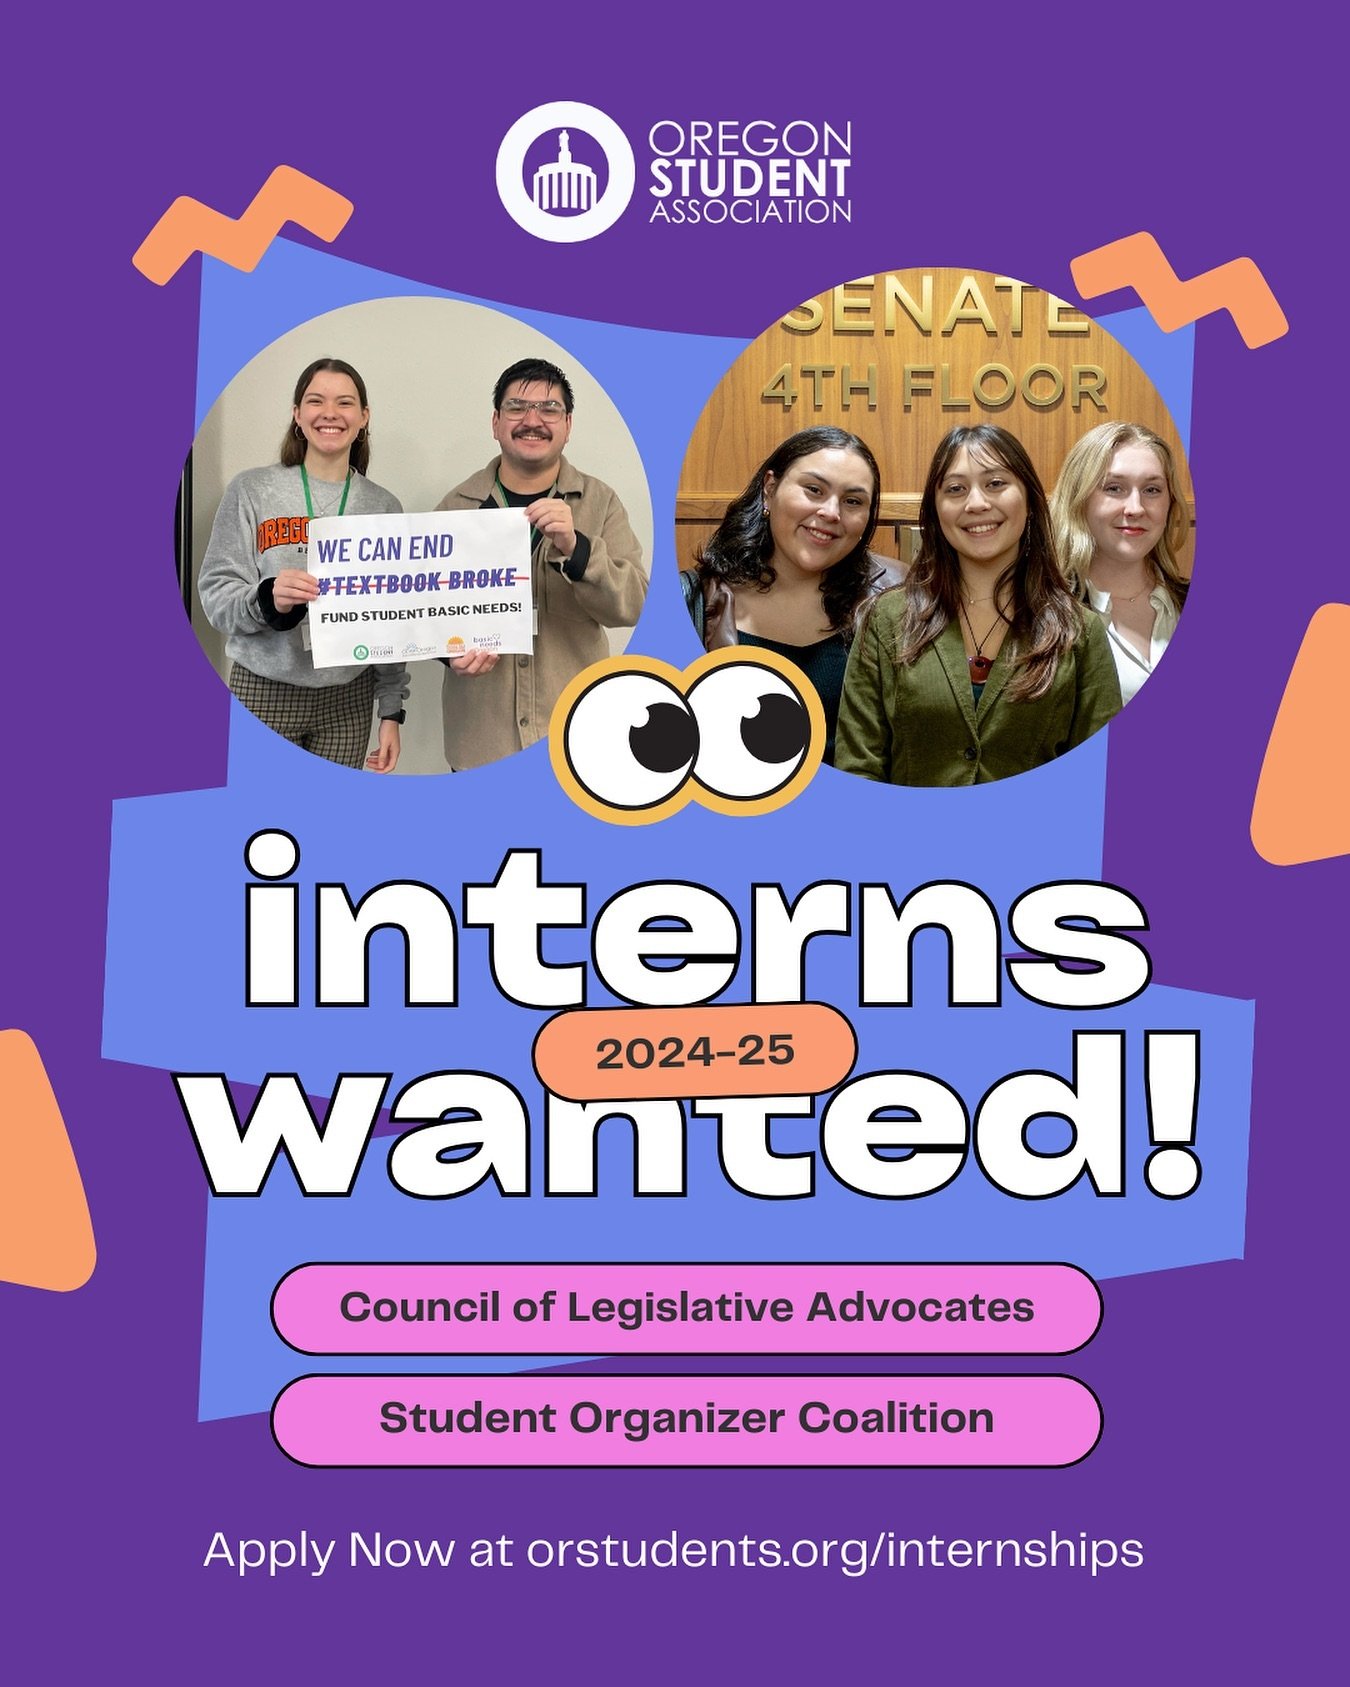 The Oregon Student Association is recruiting student interns for the 2024-25 academic year to serve on the Council of Legislative Advocates (COLA) and the Student Organizer Coalition (SOC)&hellip;😍📝

What is the Council of Legislative Advocates (CO